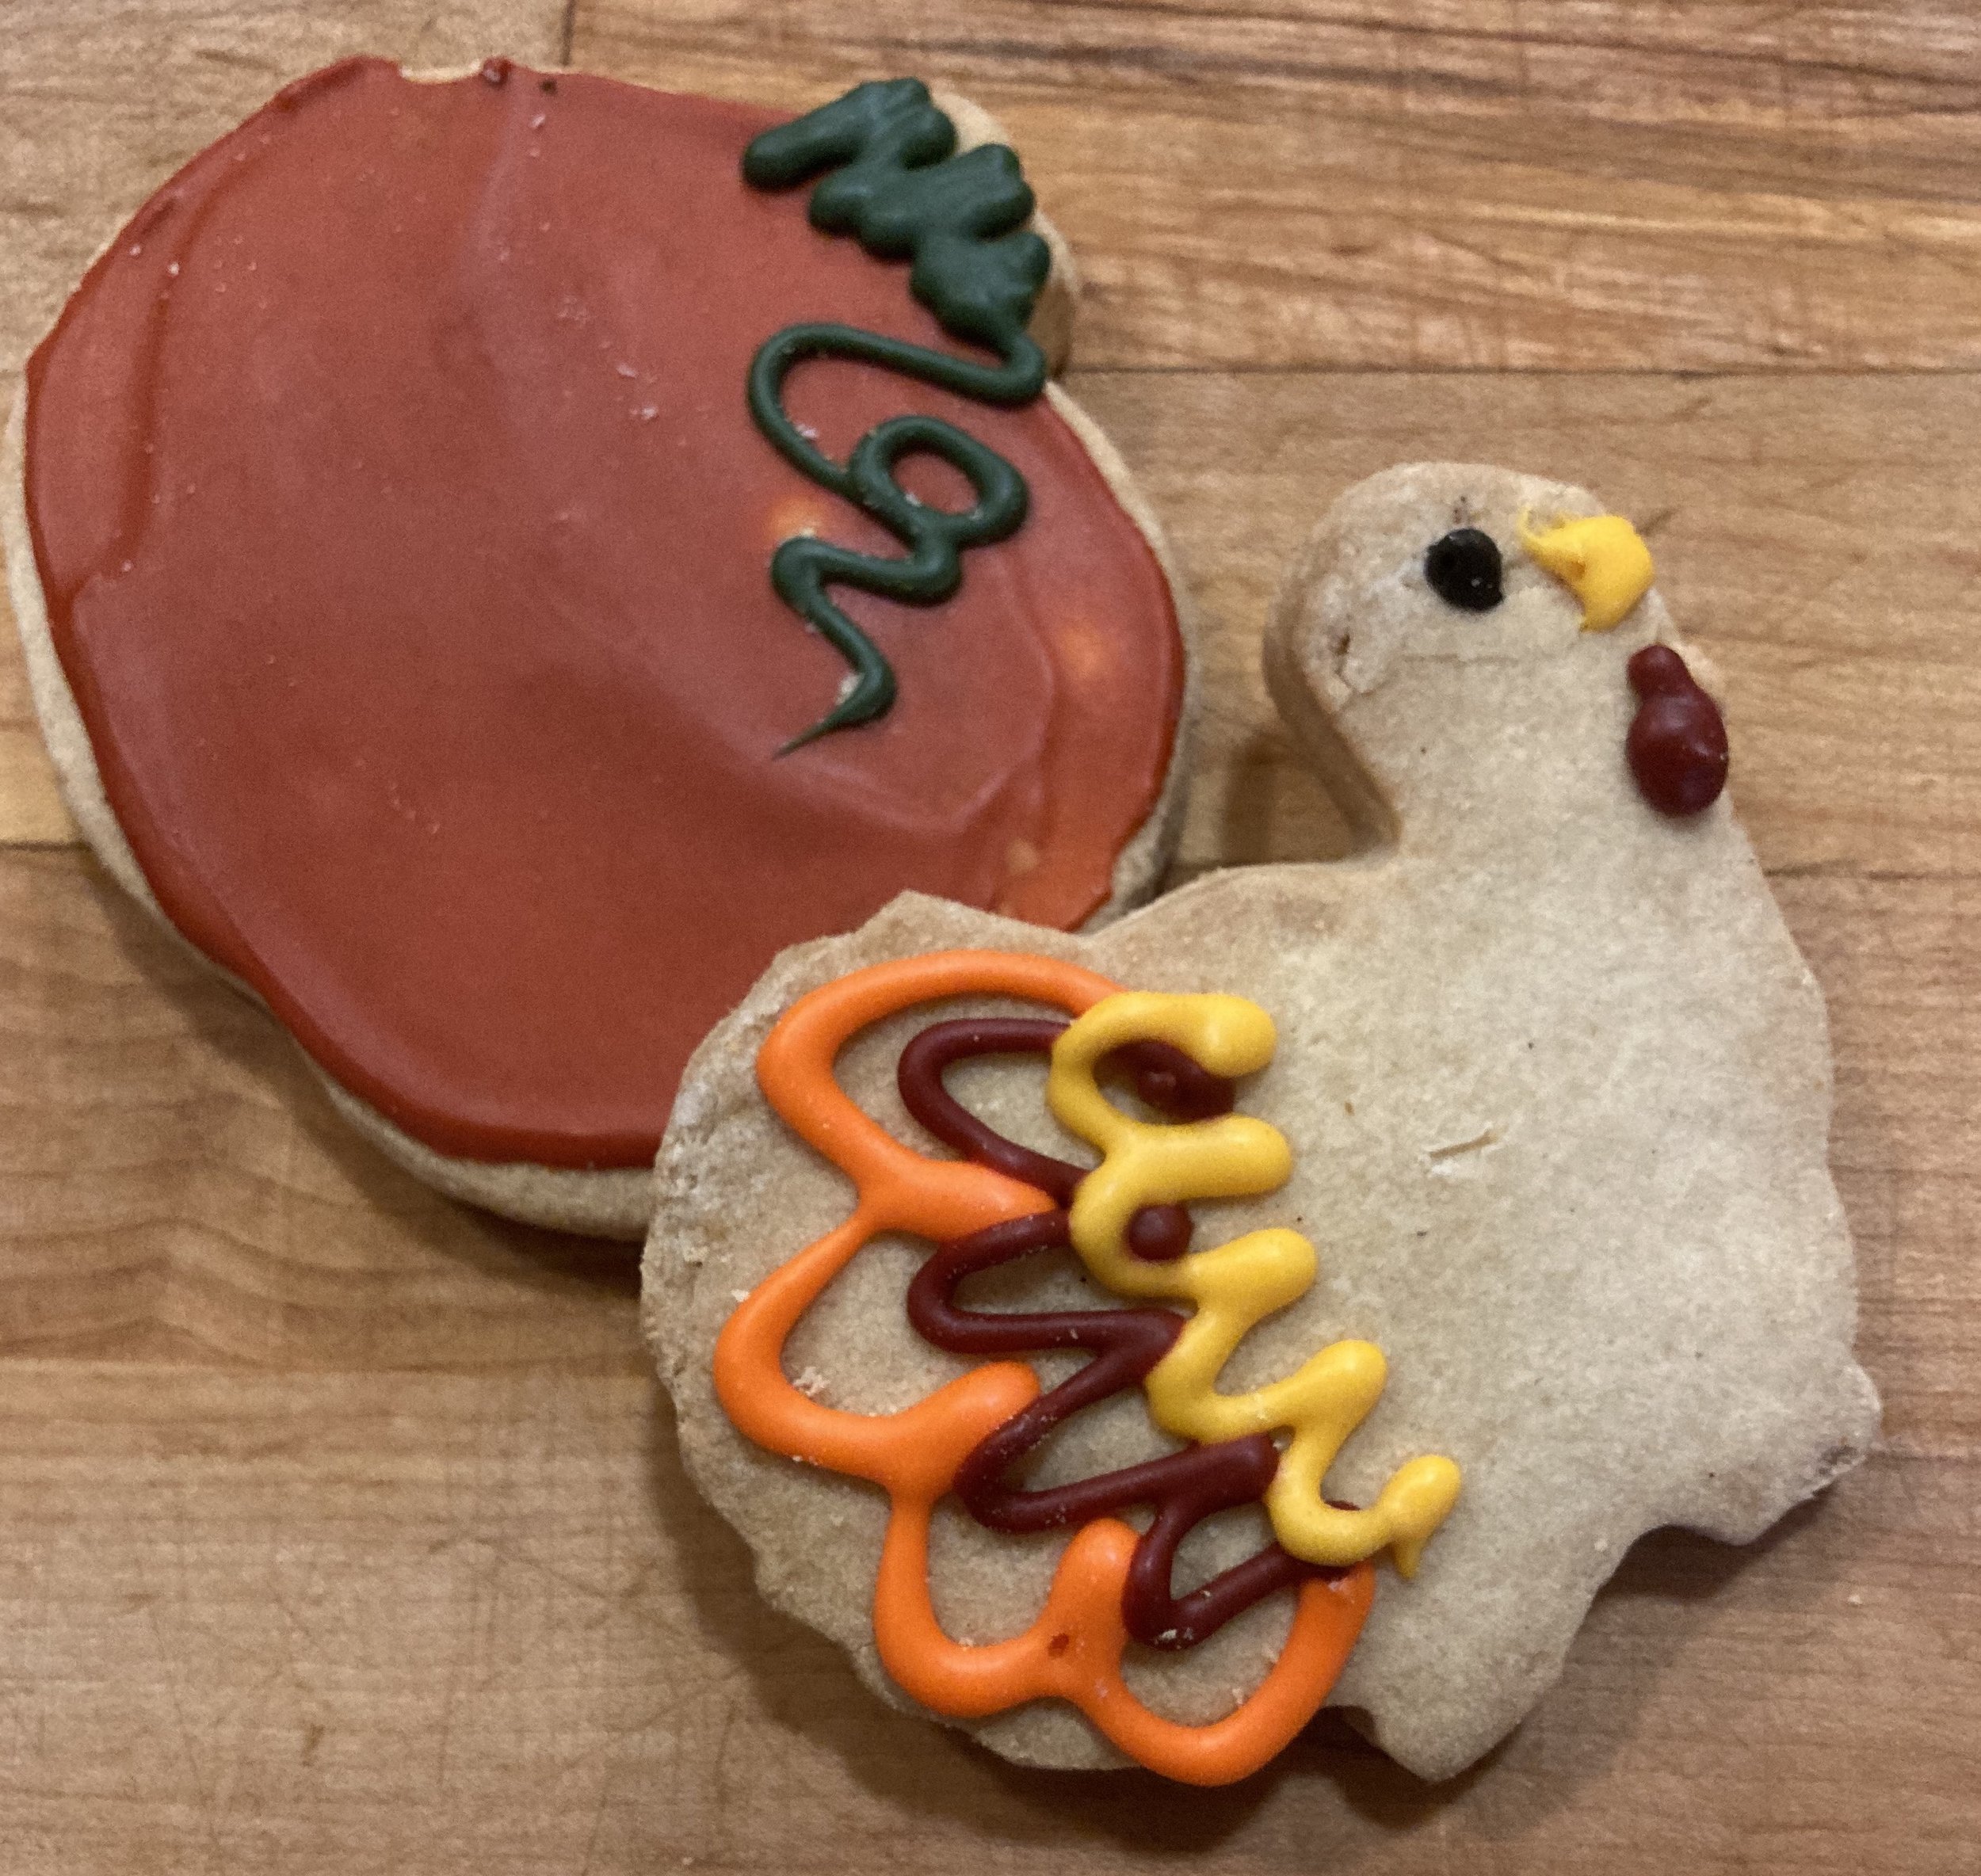 2021 Tday Decorated cookies.JPG